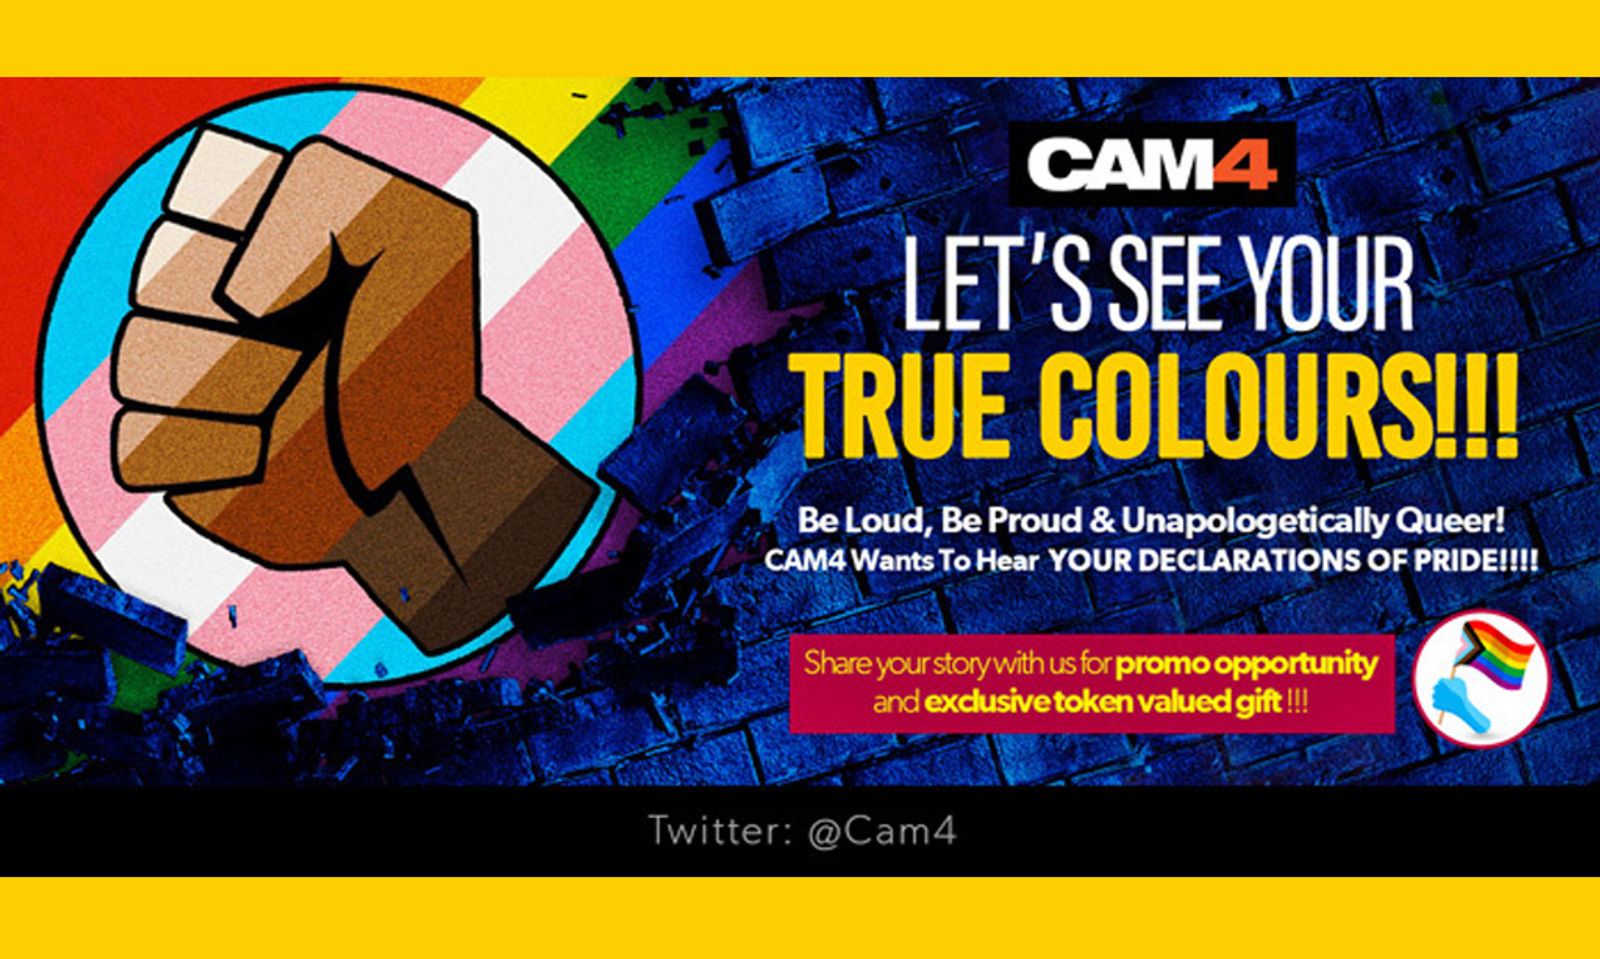 CAM4 Asks Users for 'Declarations of Pride'